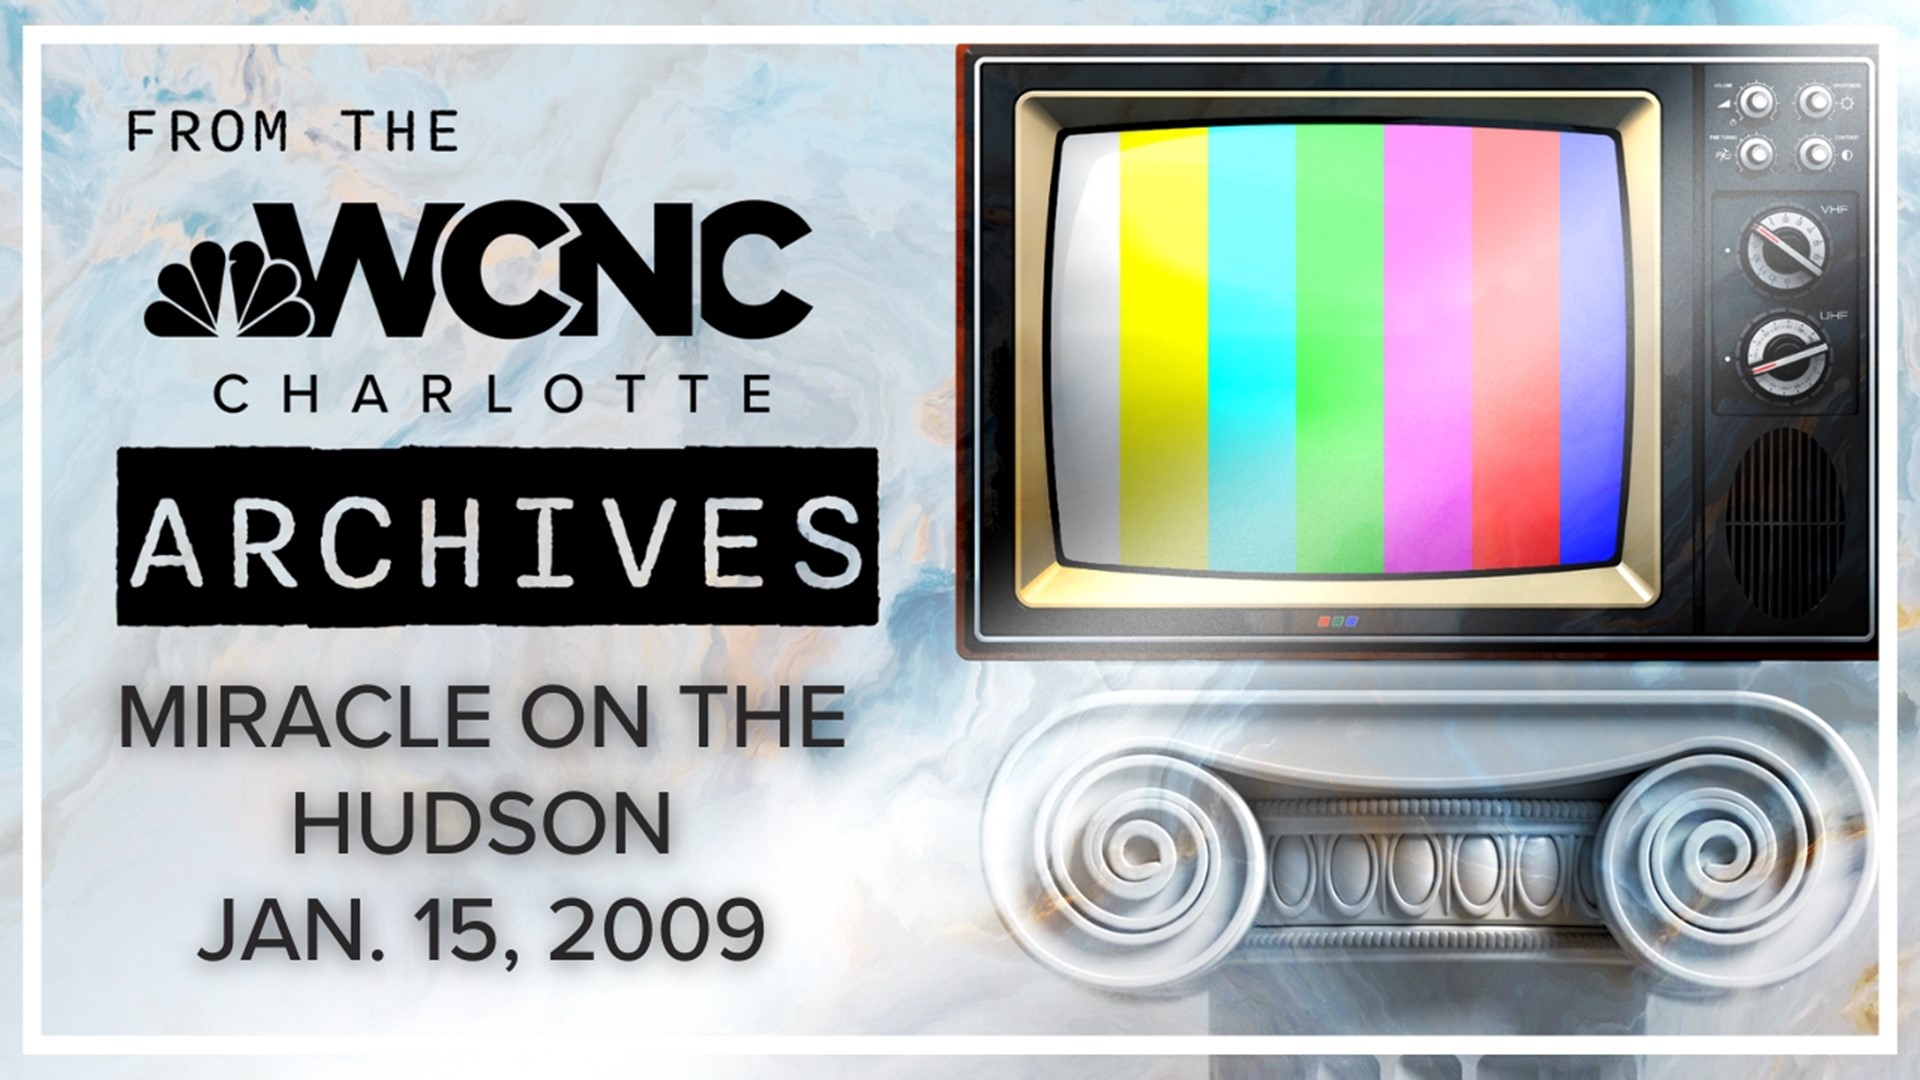 WCNC Charlotte's archival footage of the Miracle on the Hudson